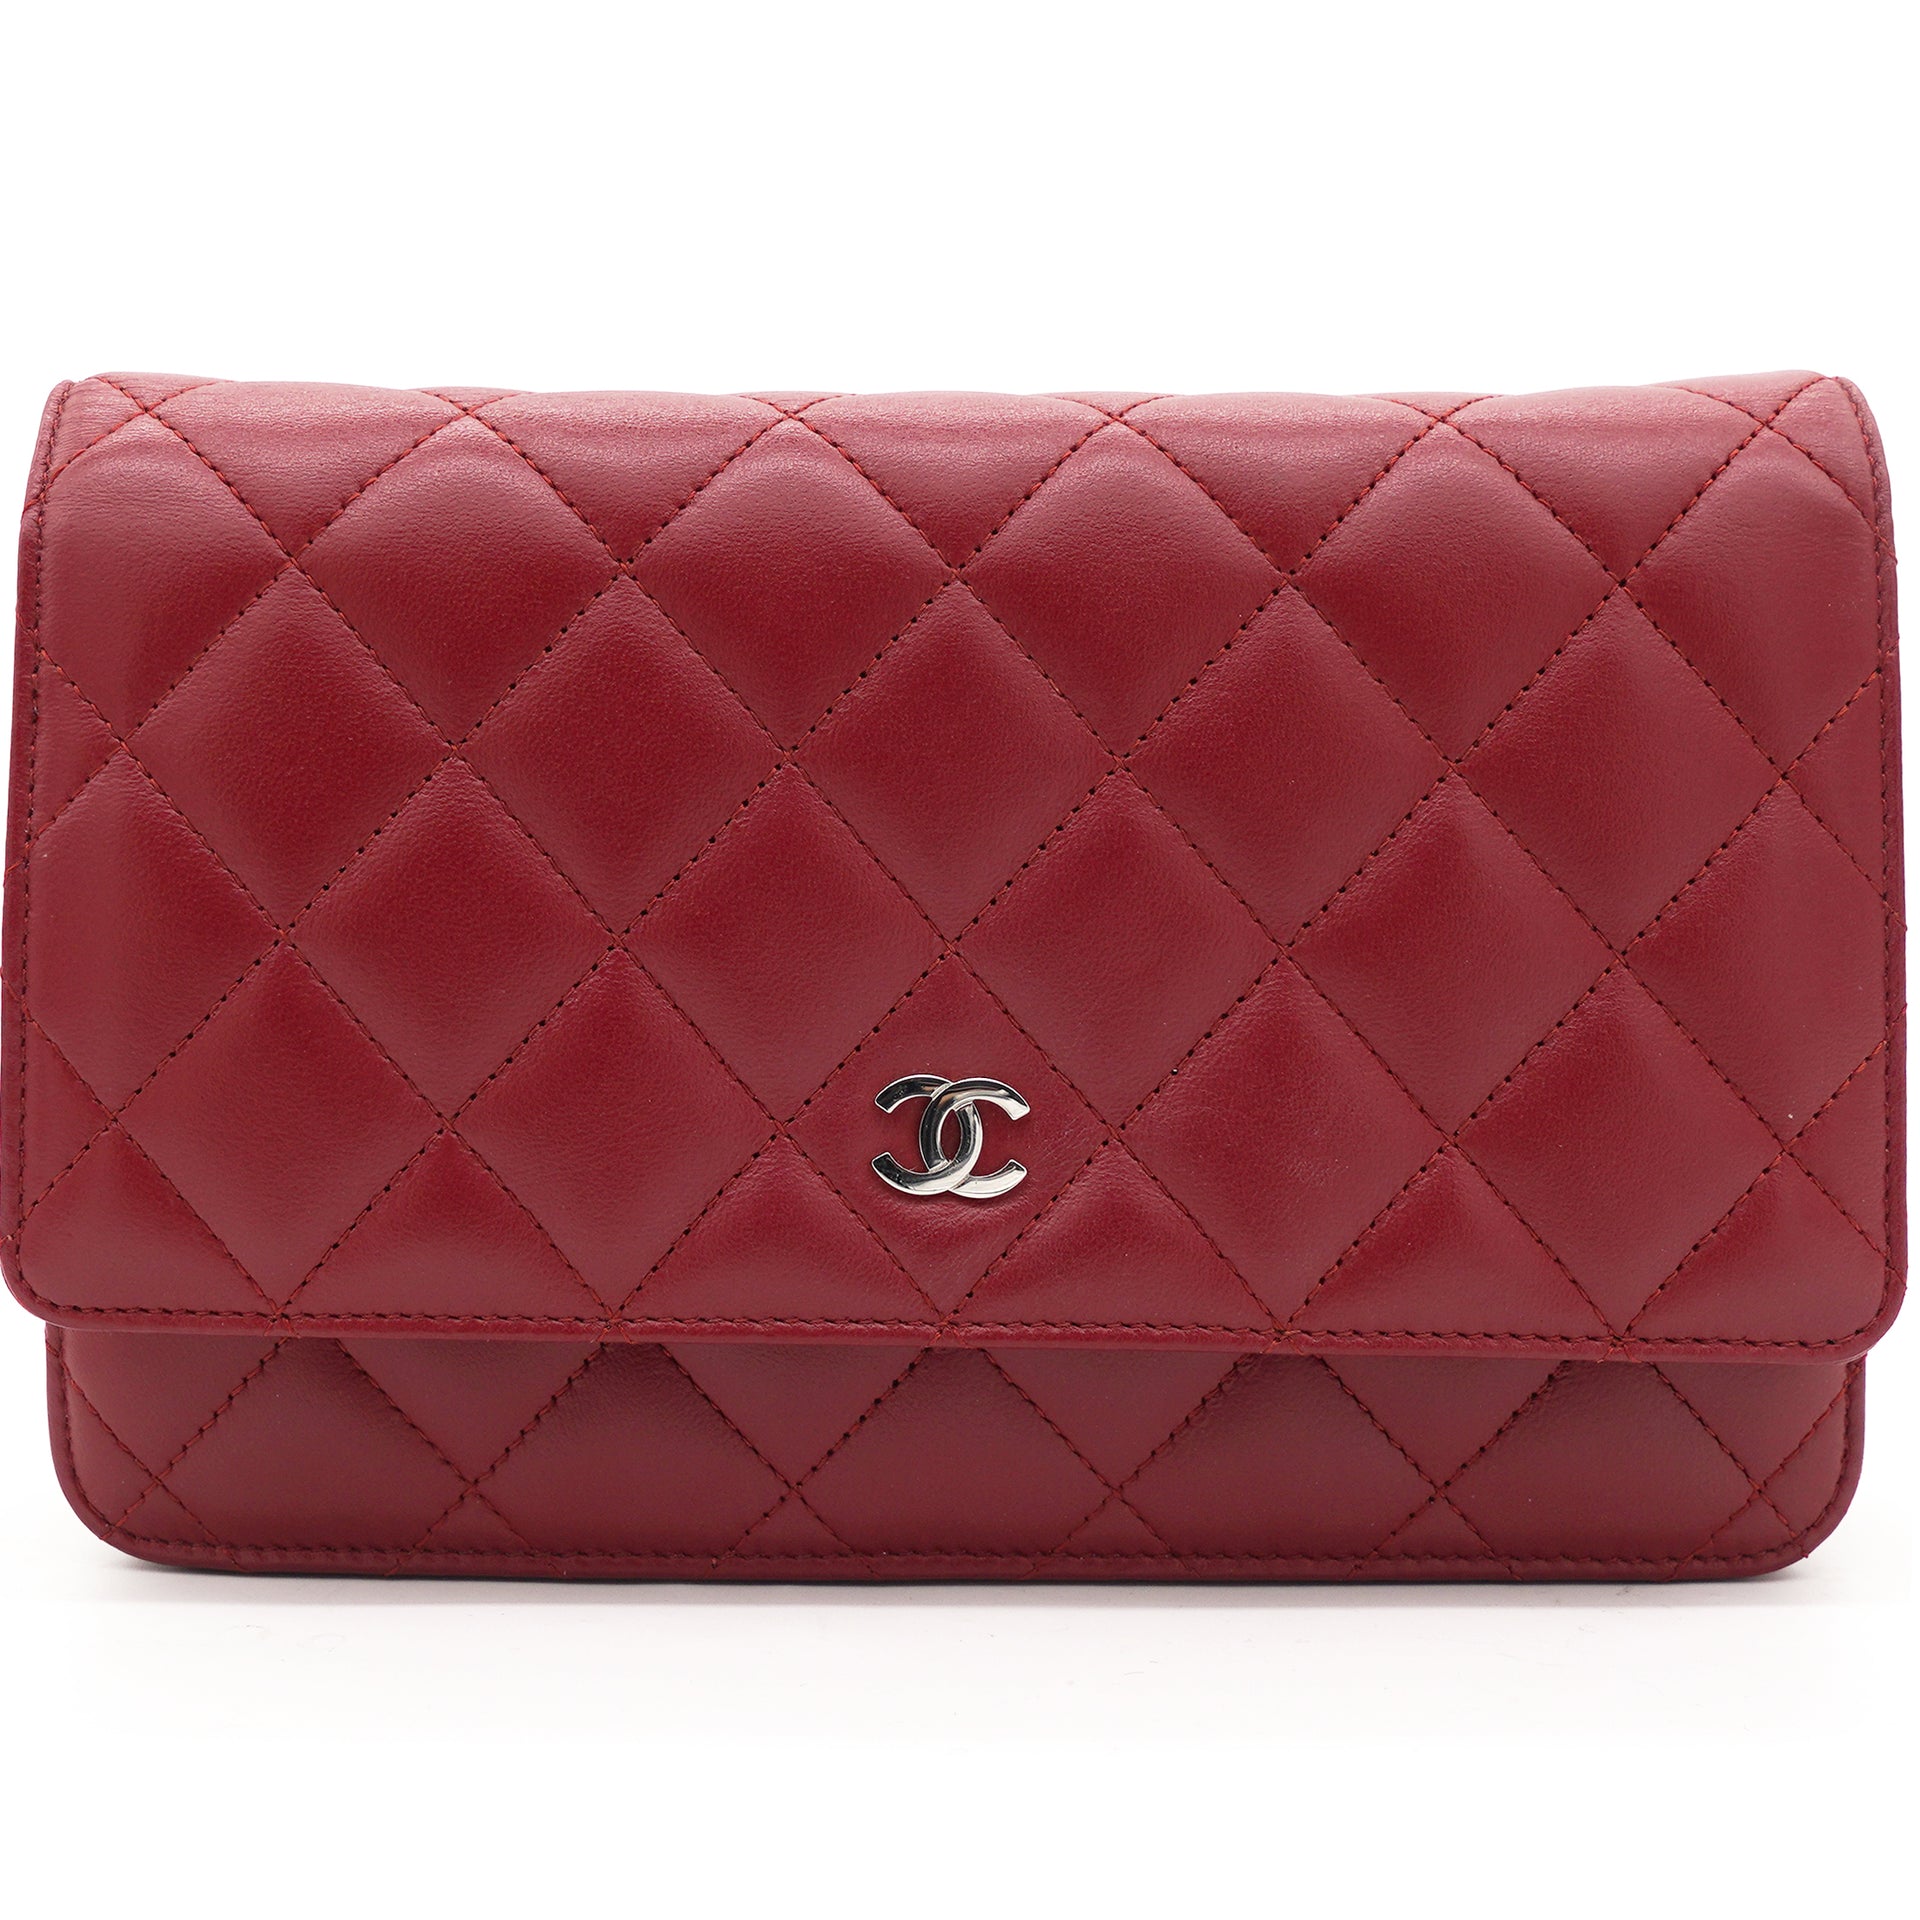 Chanel Wallet on Chain shoulder bag in burgundy/black quilted leather, GHW